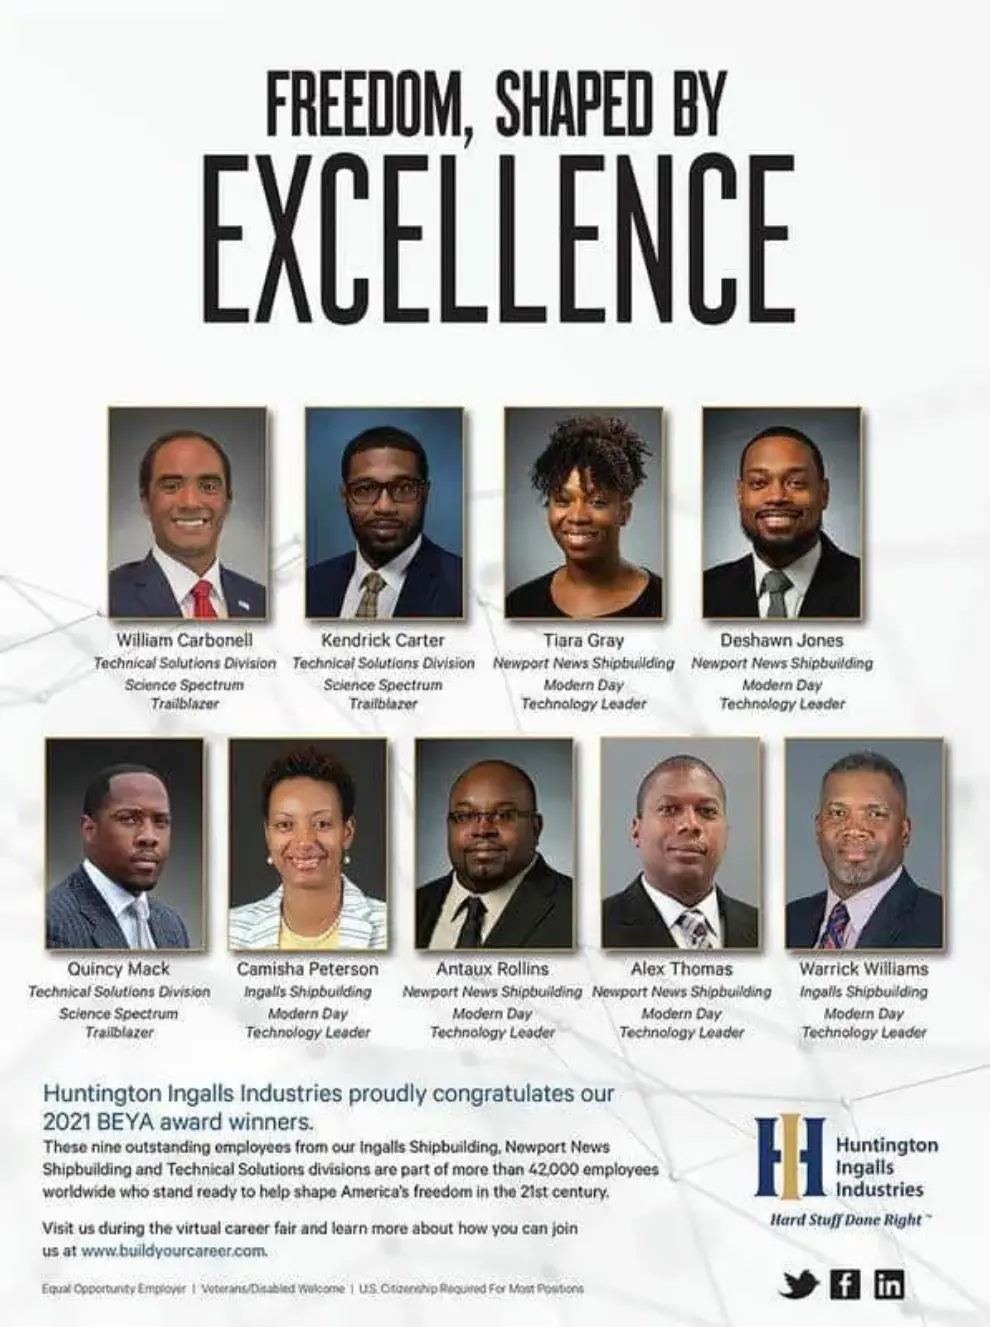 Huntington Ingalls Industries Employees Honored at 35th Annual Black Engineer of the Year Award STEM Conference